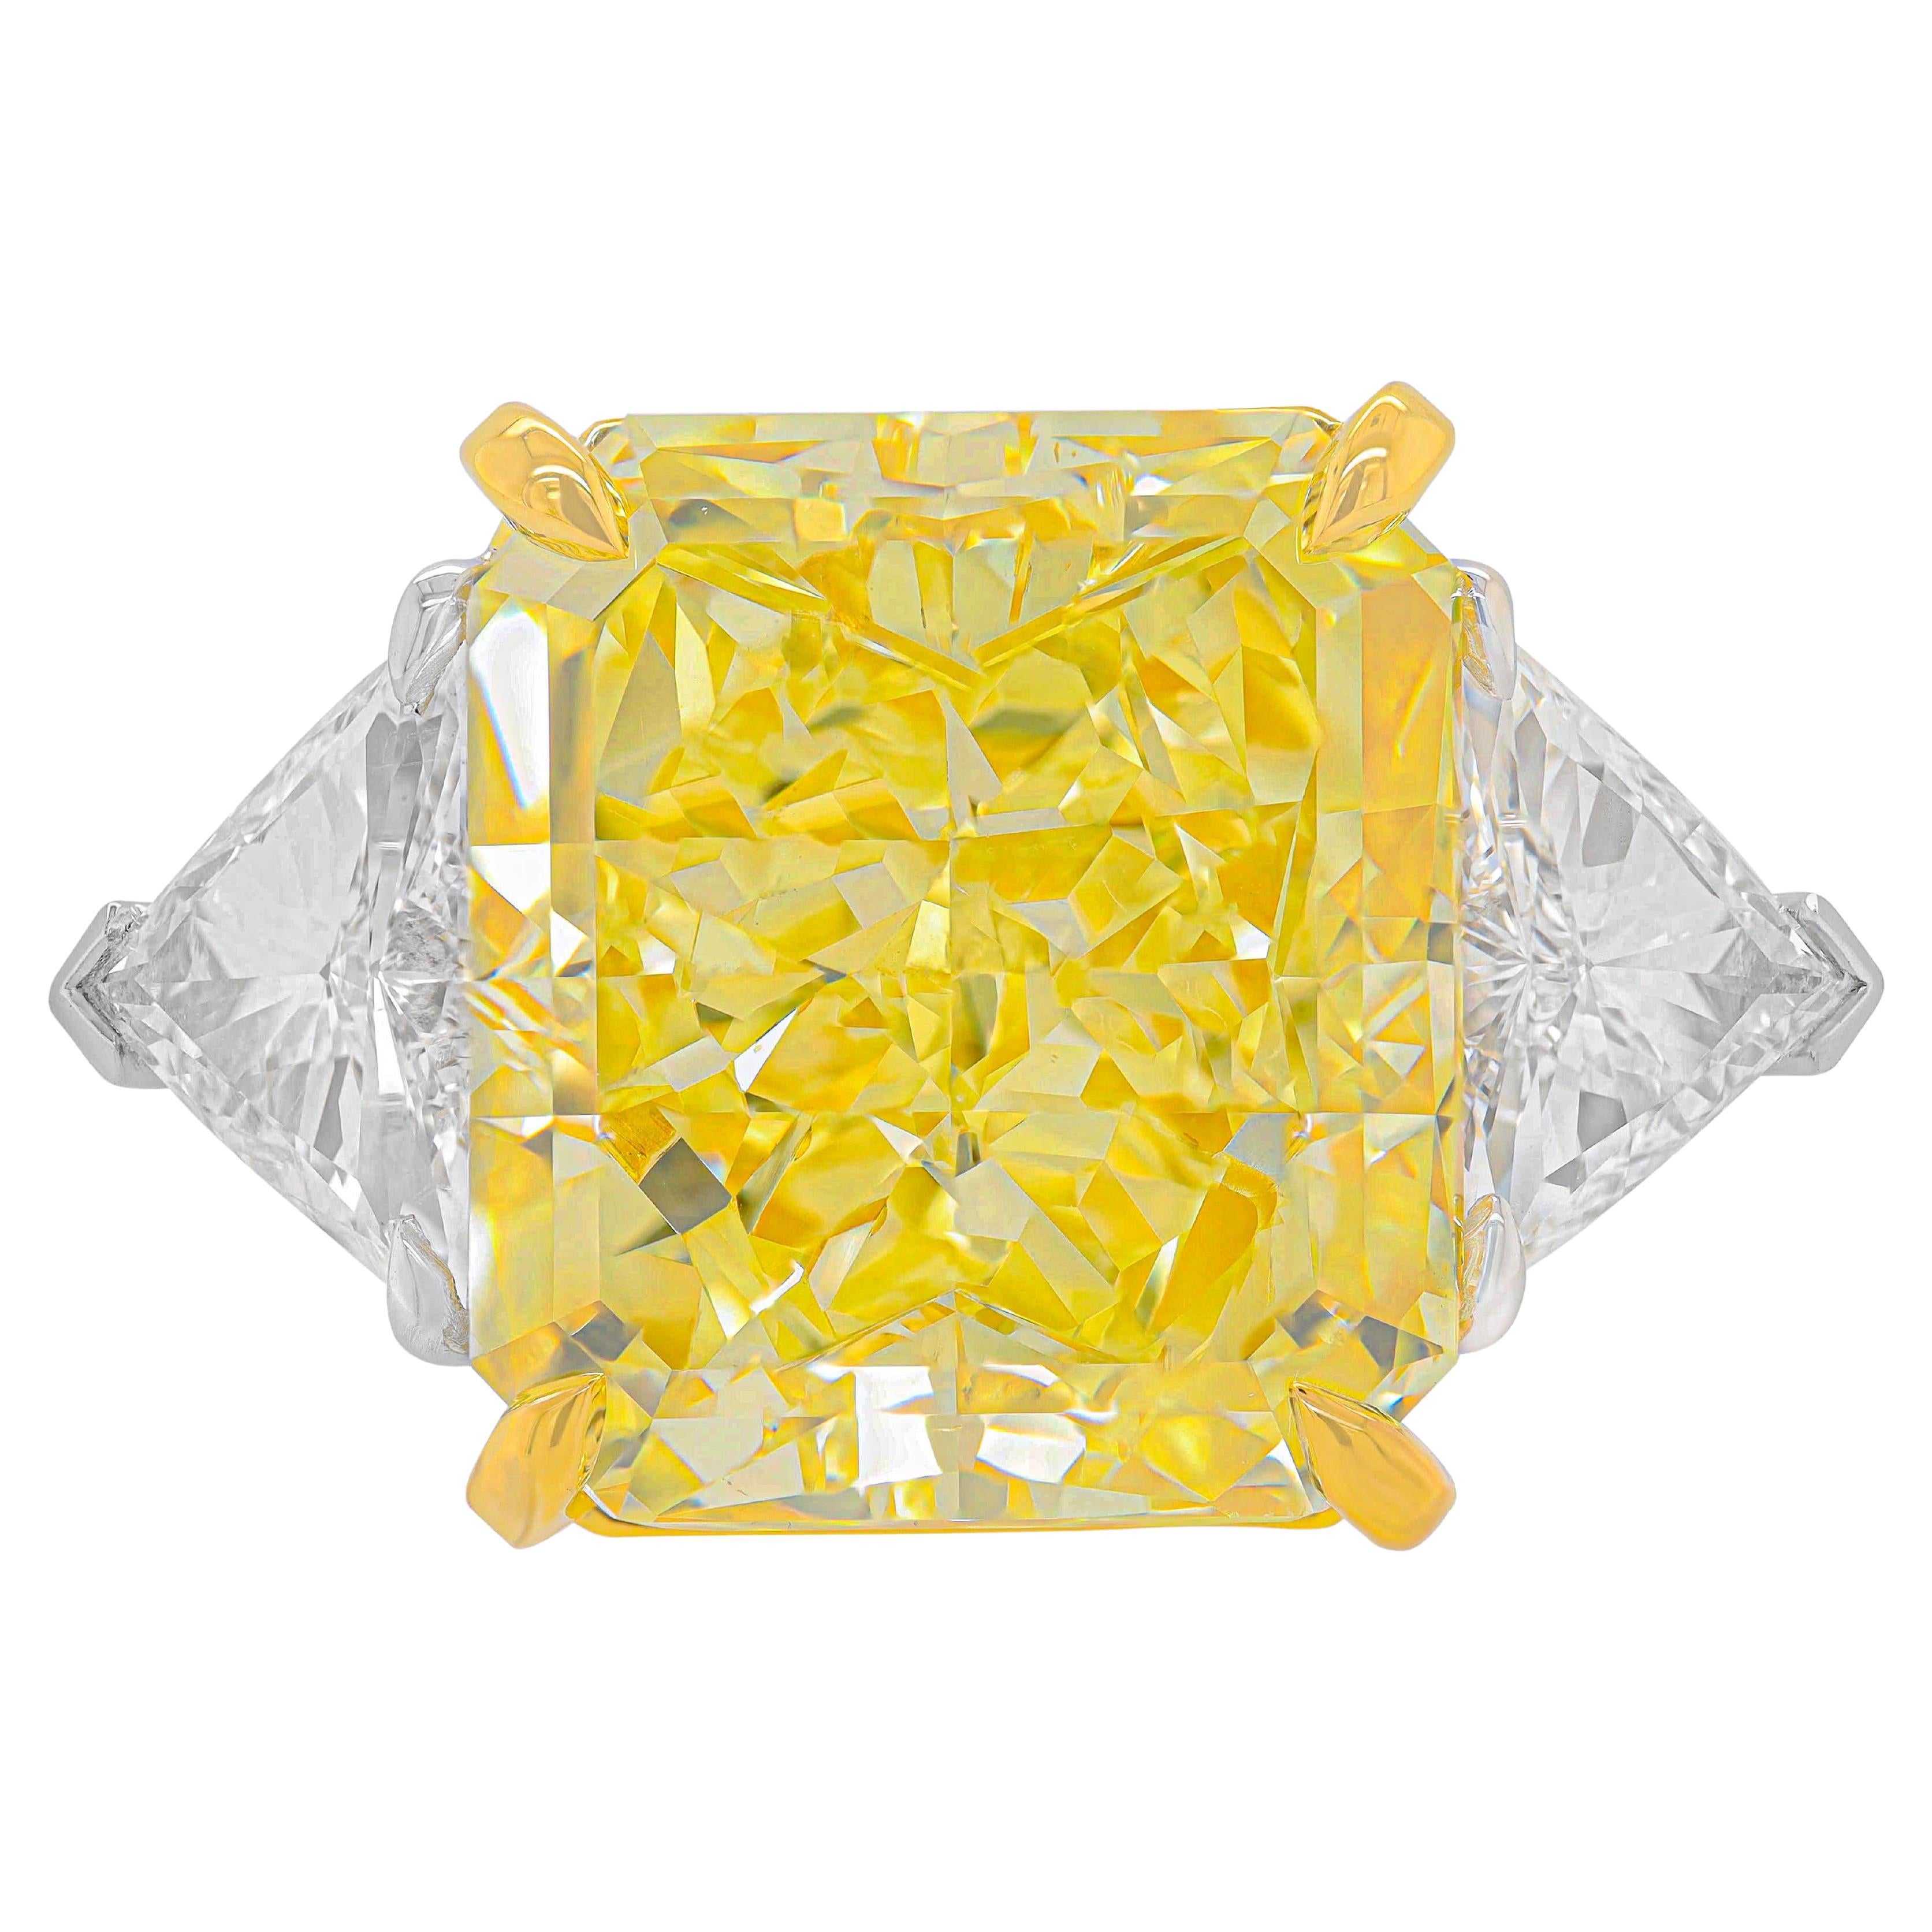 Diana M. Fancy Intense Yellow Diamond 23.88cts VS2 Set with 2cts Trillions GIA For Sale